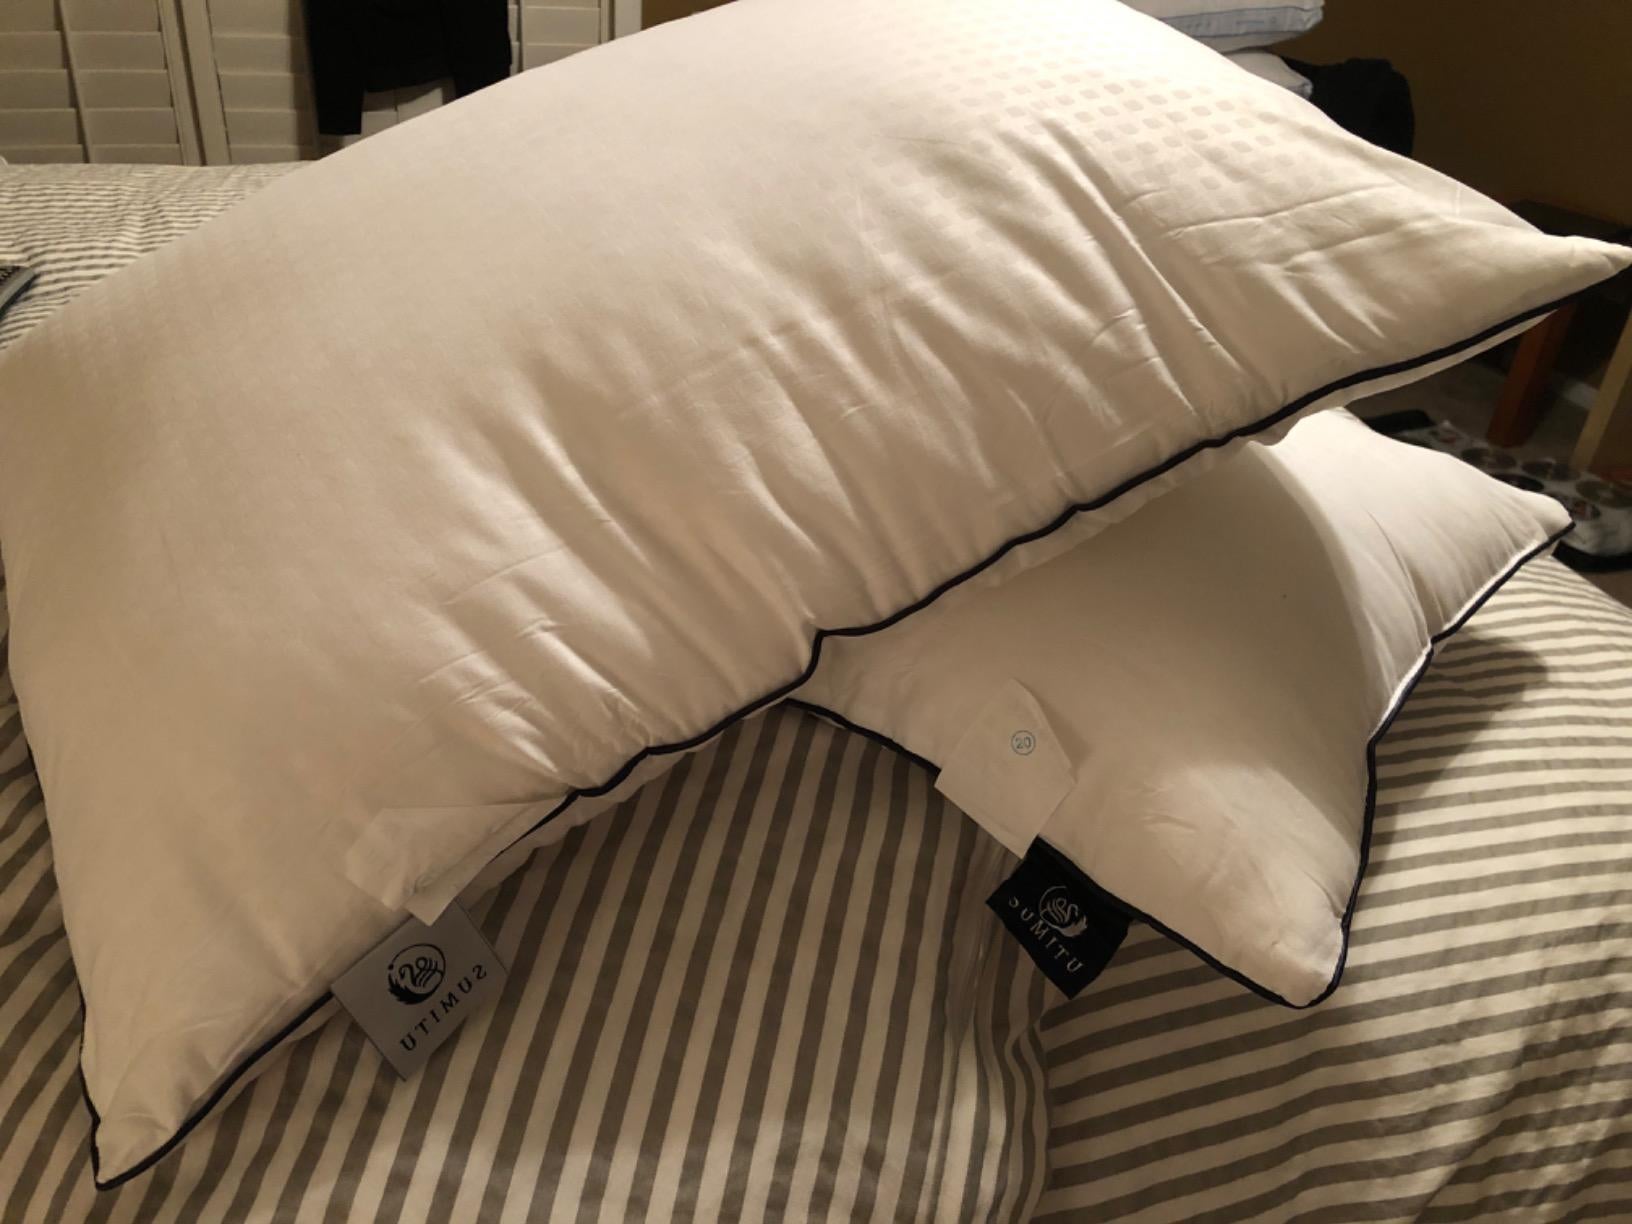 Two pillows on a bed